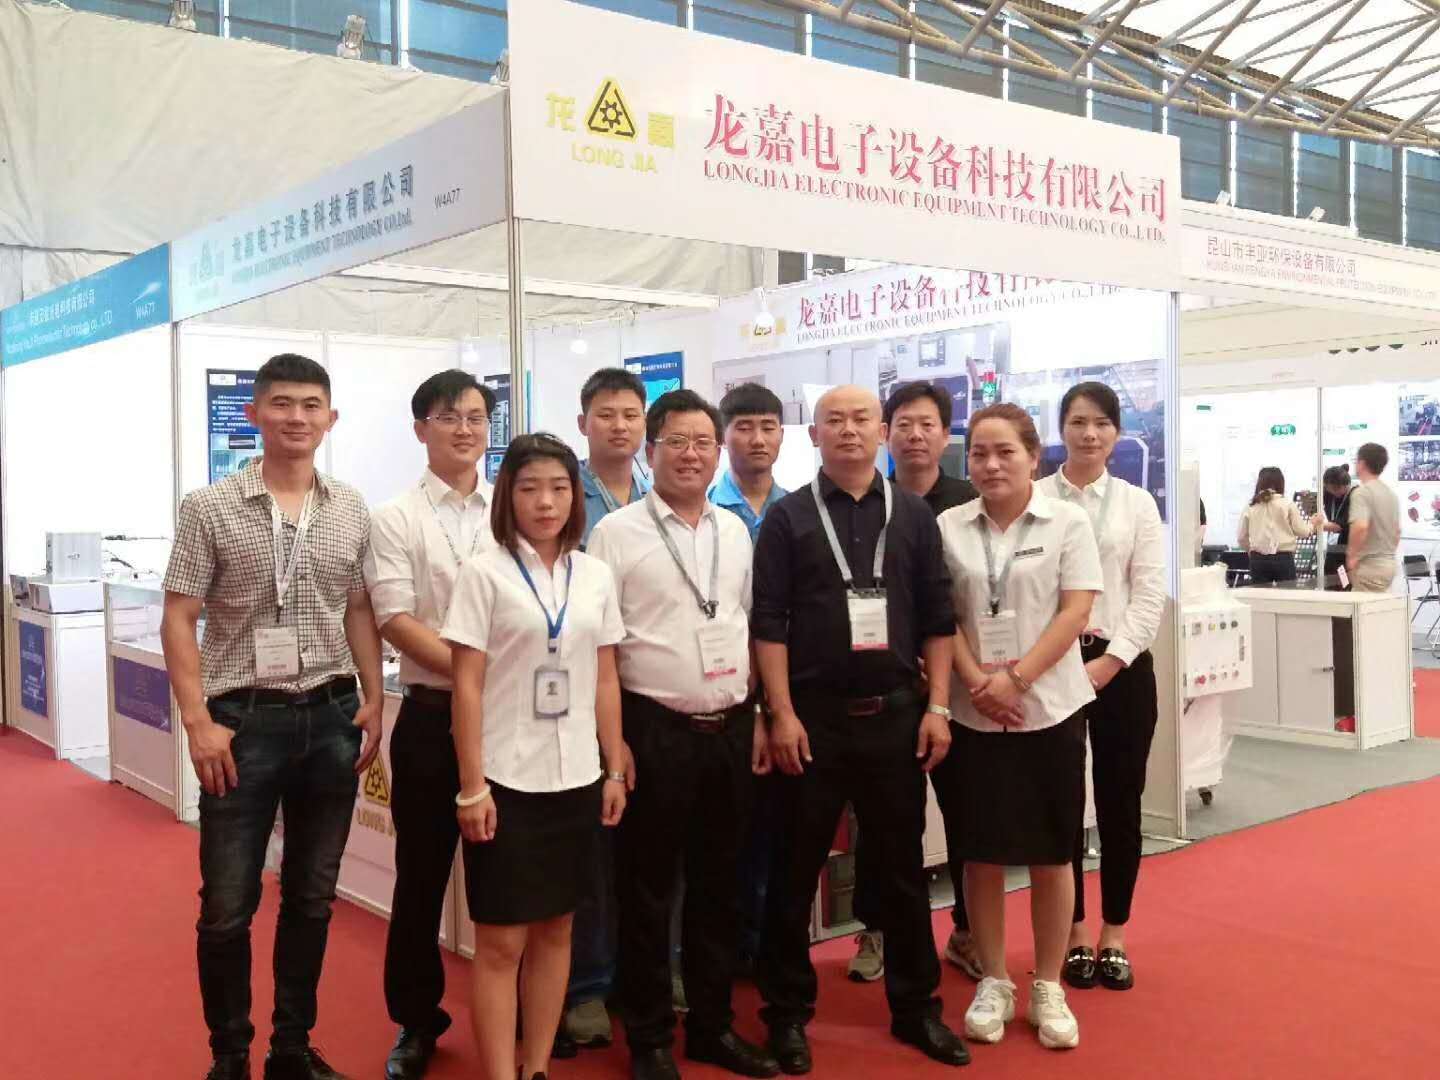 General manager wang zhenwei and the staff to attend the 2018 China international exhibition on cable and wire technology!